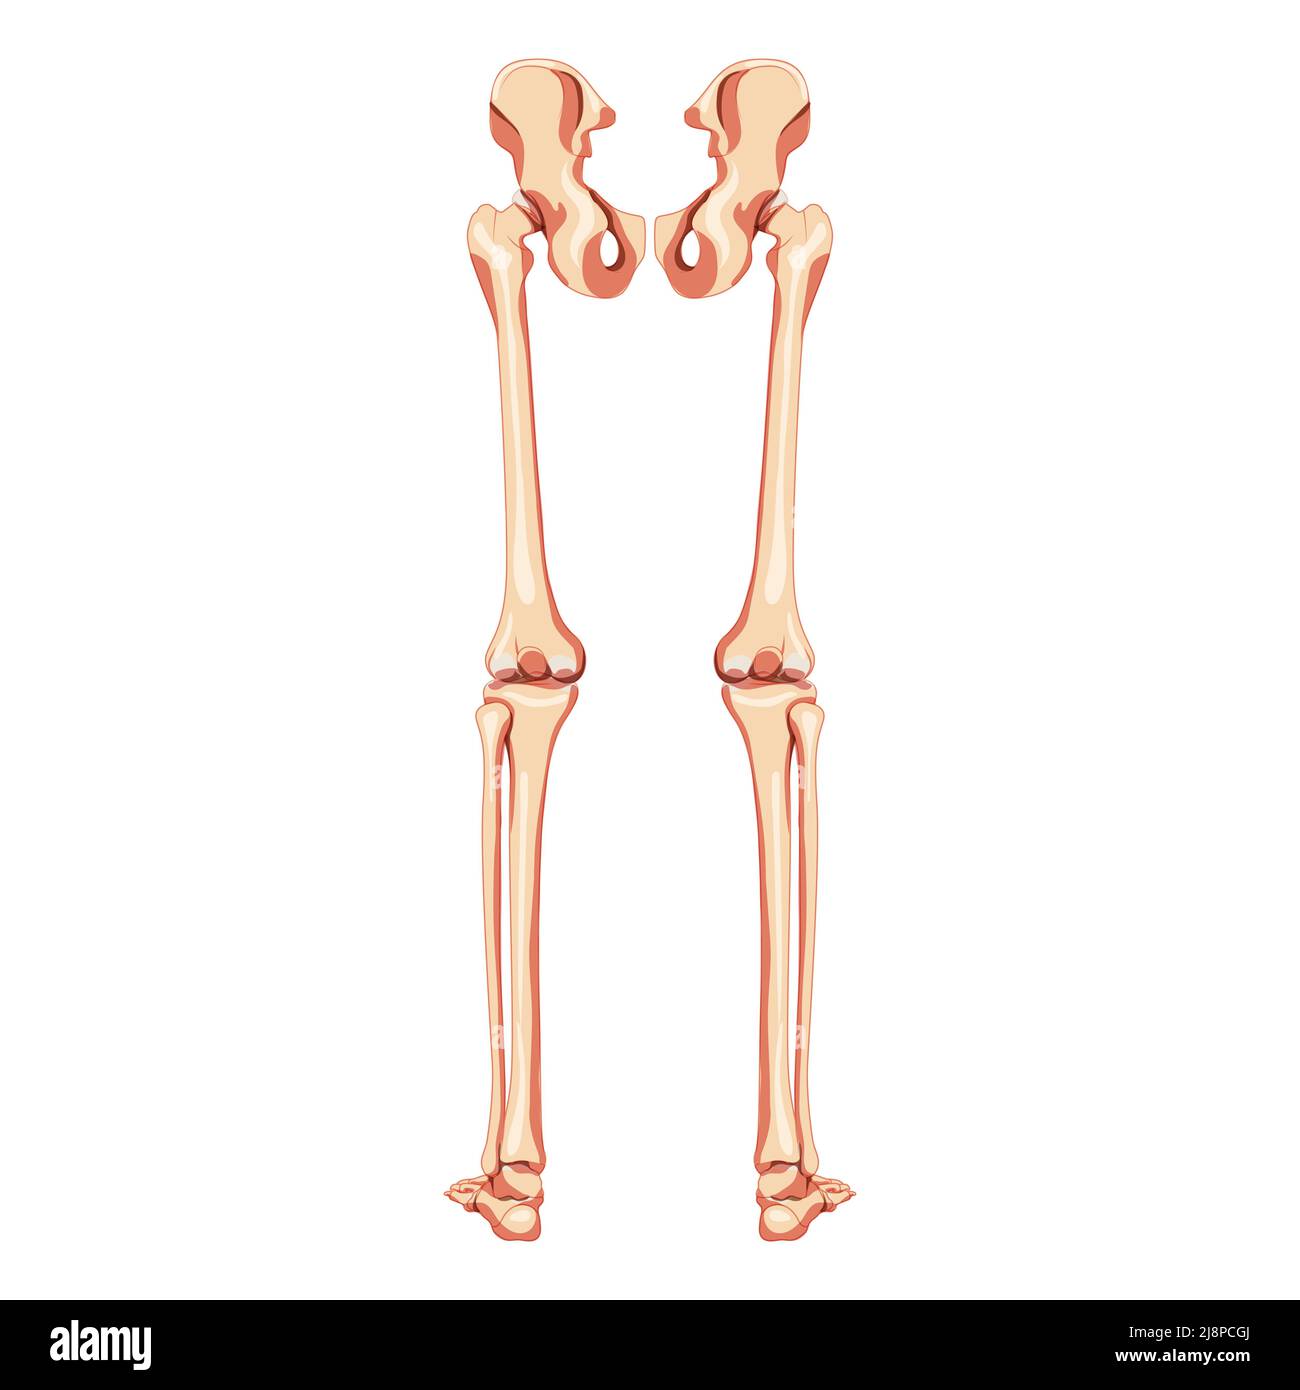 The Bones of the Pelvis and Lower Back: 3D Anatomy Model